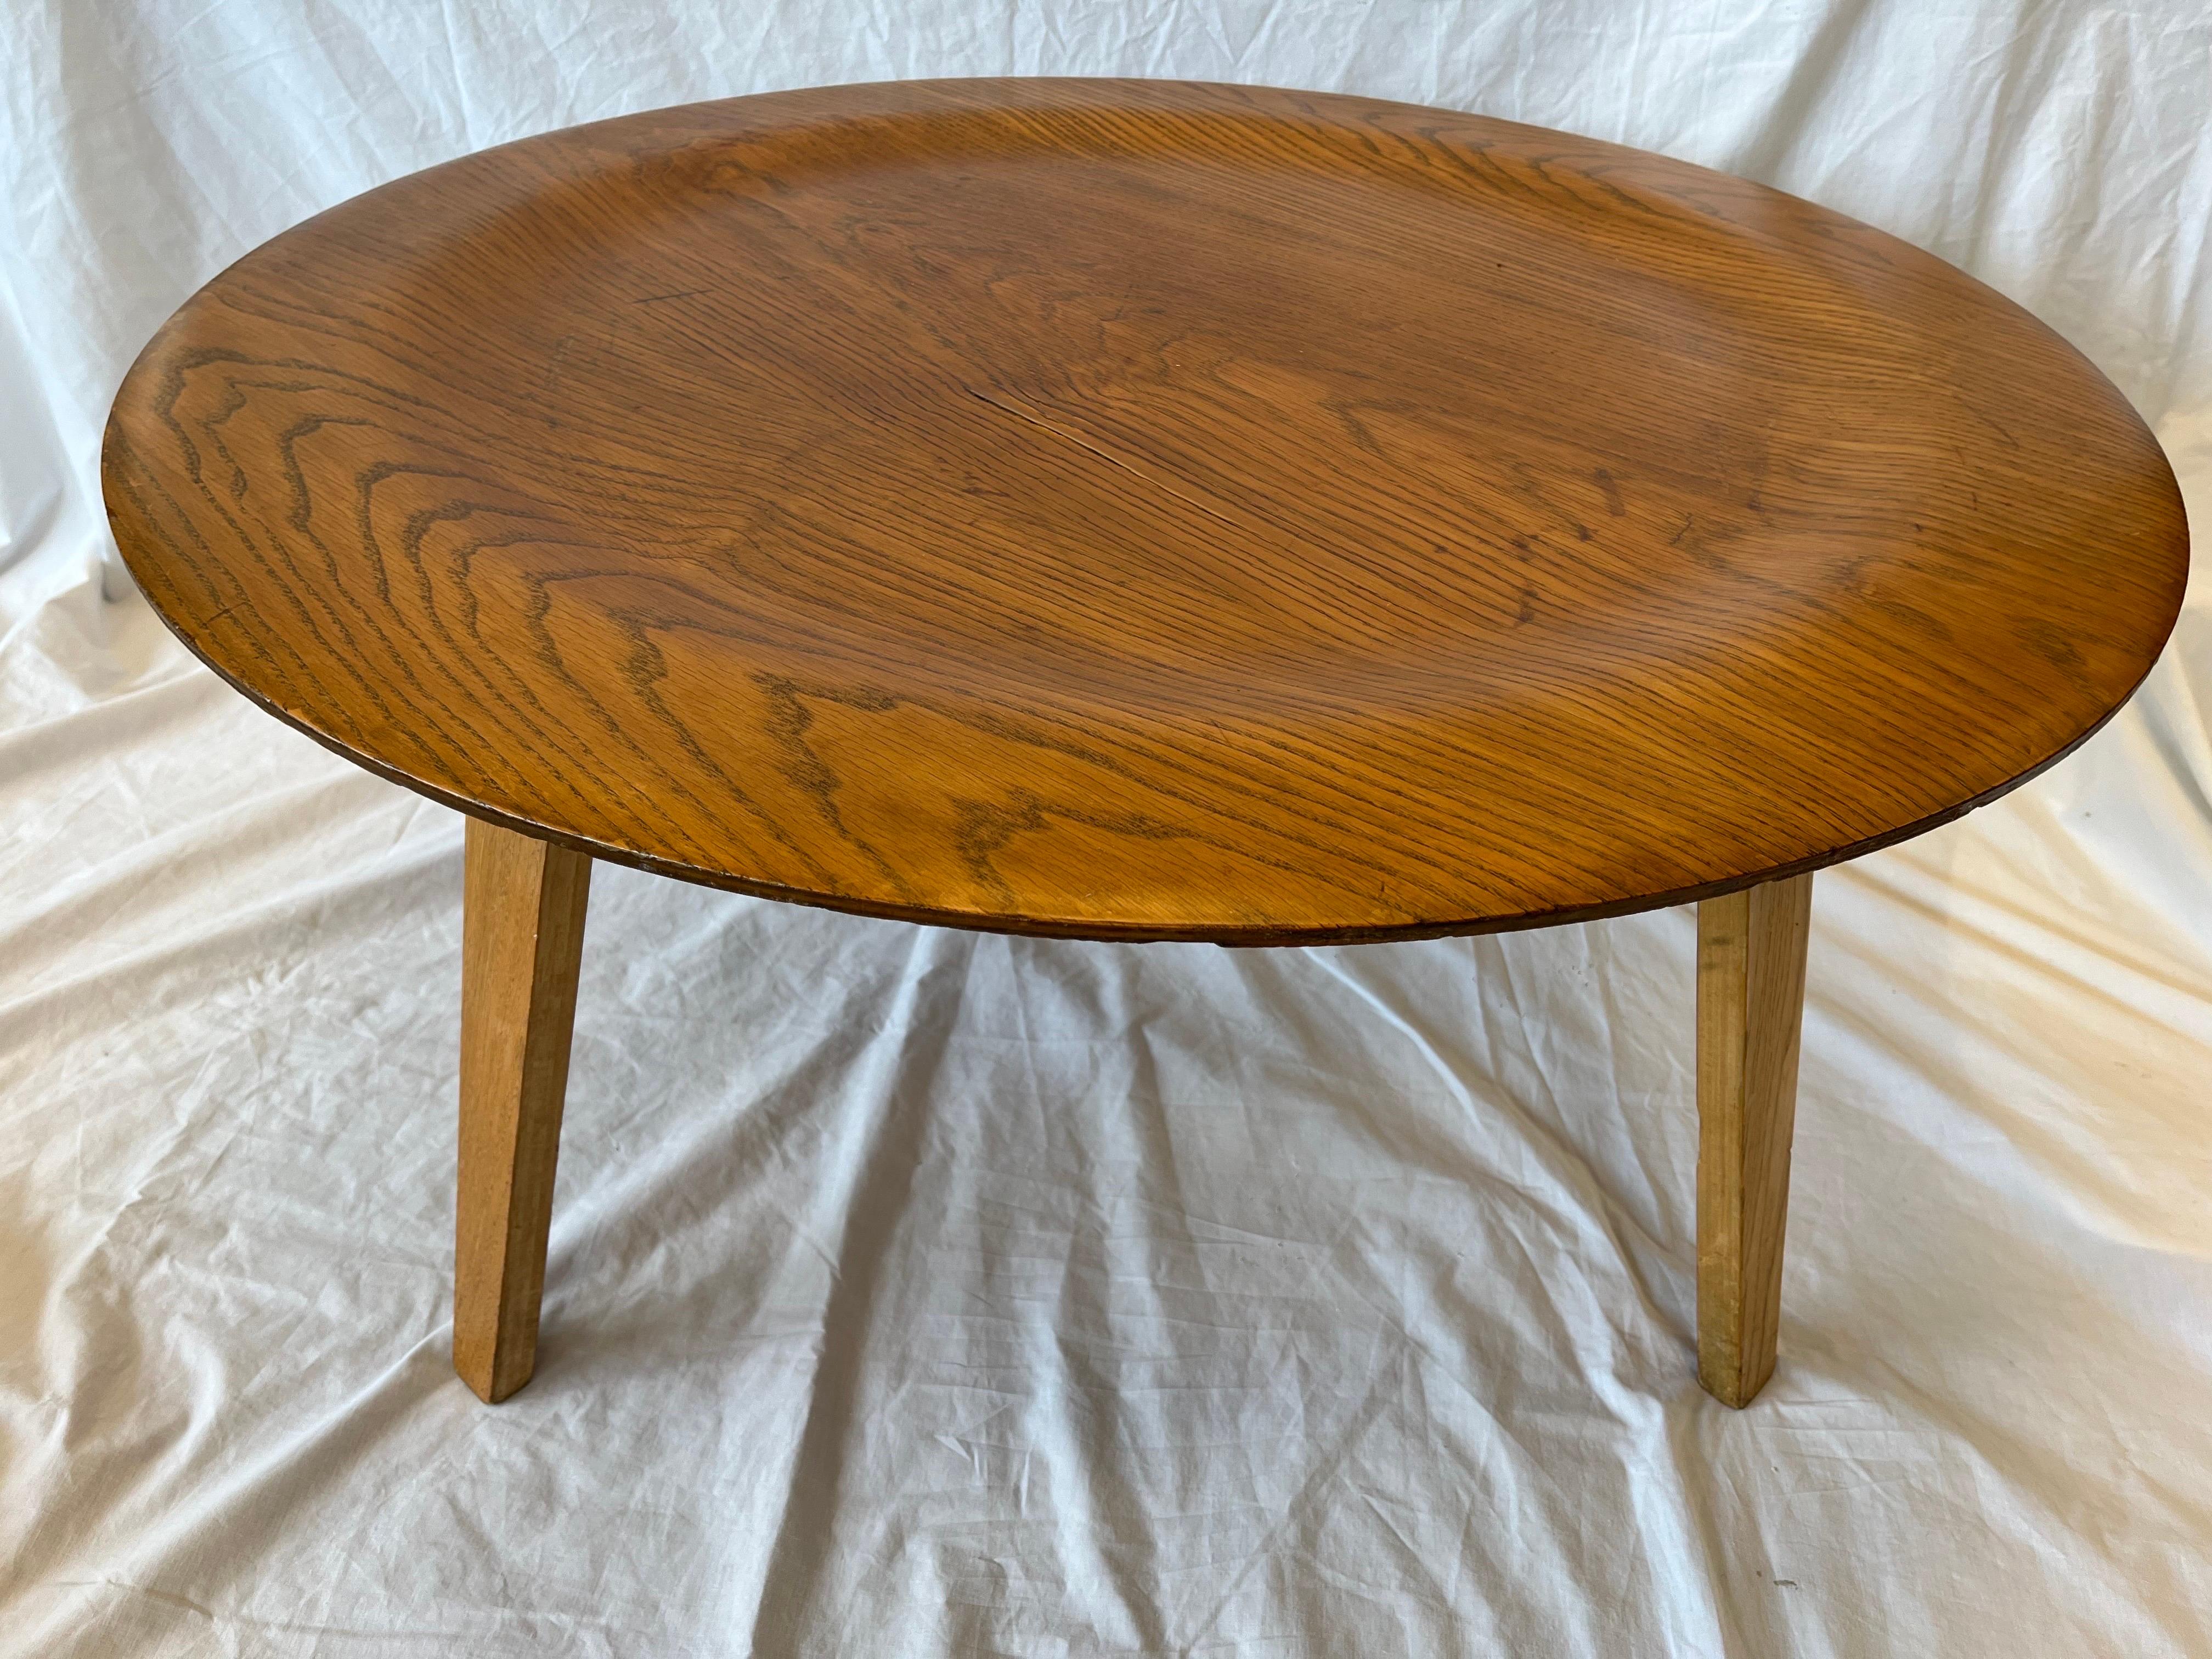 American Vintage Charles Eames CTW Molded Plywood Coffee Table circa 1950s Label Verso